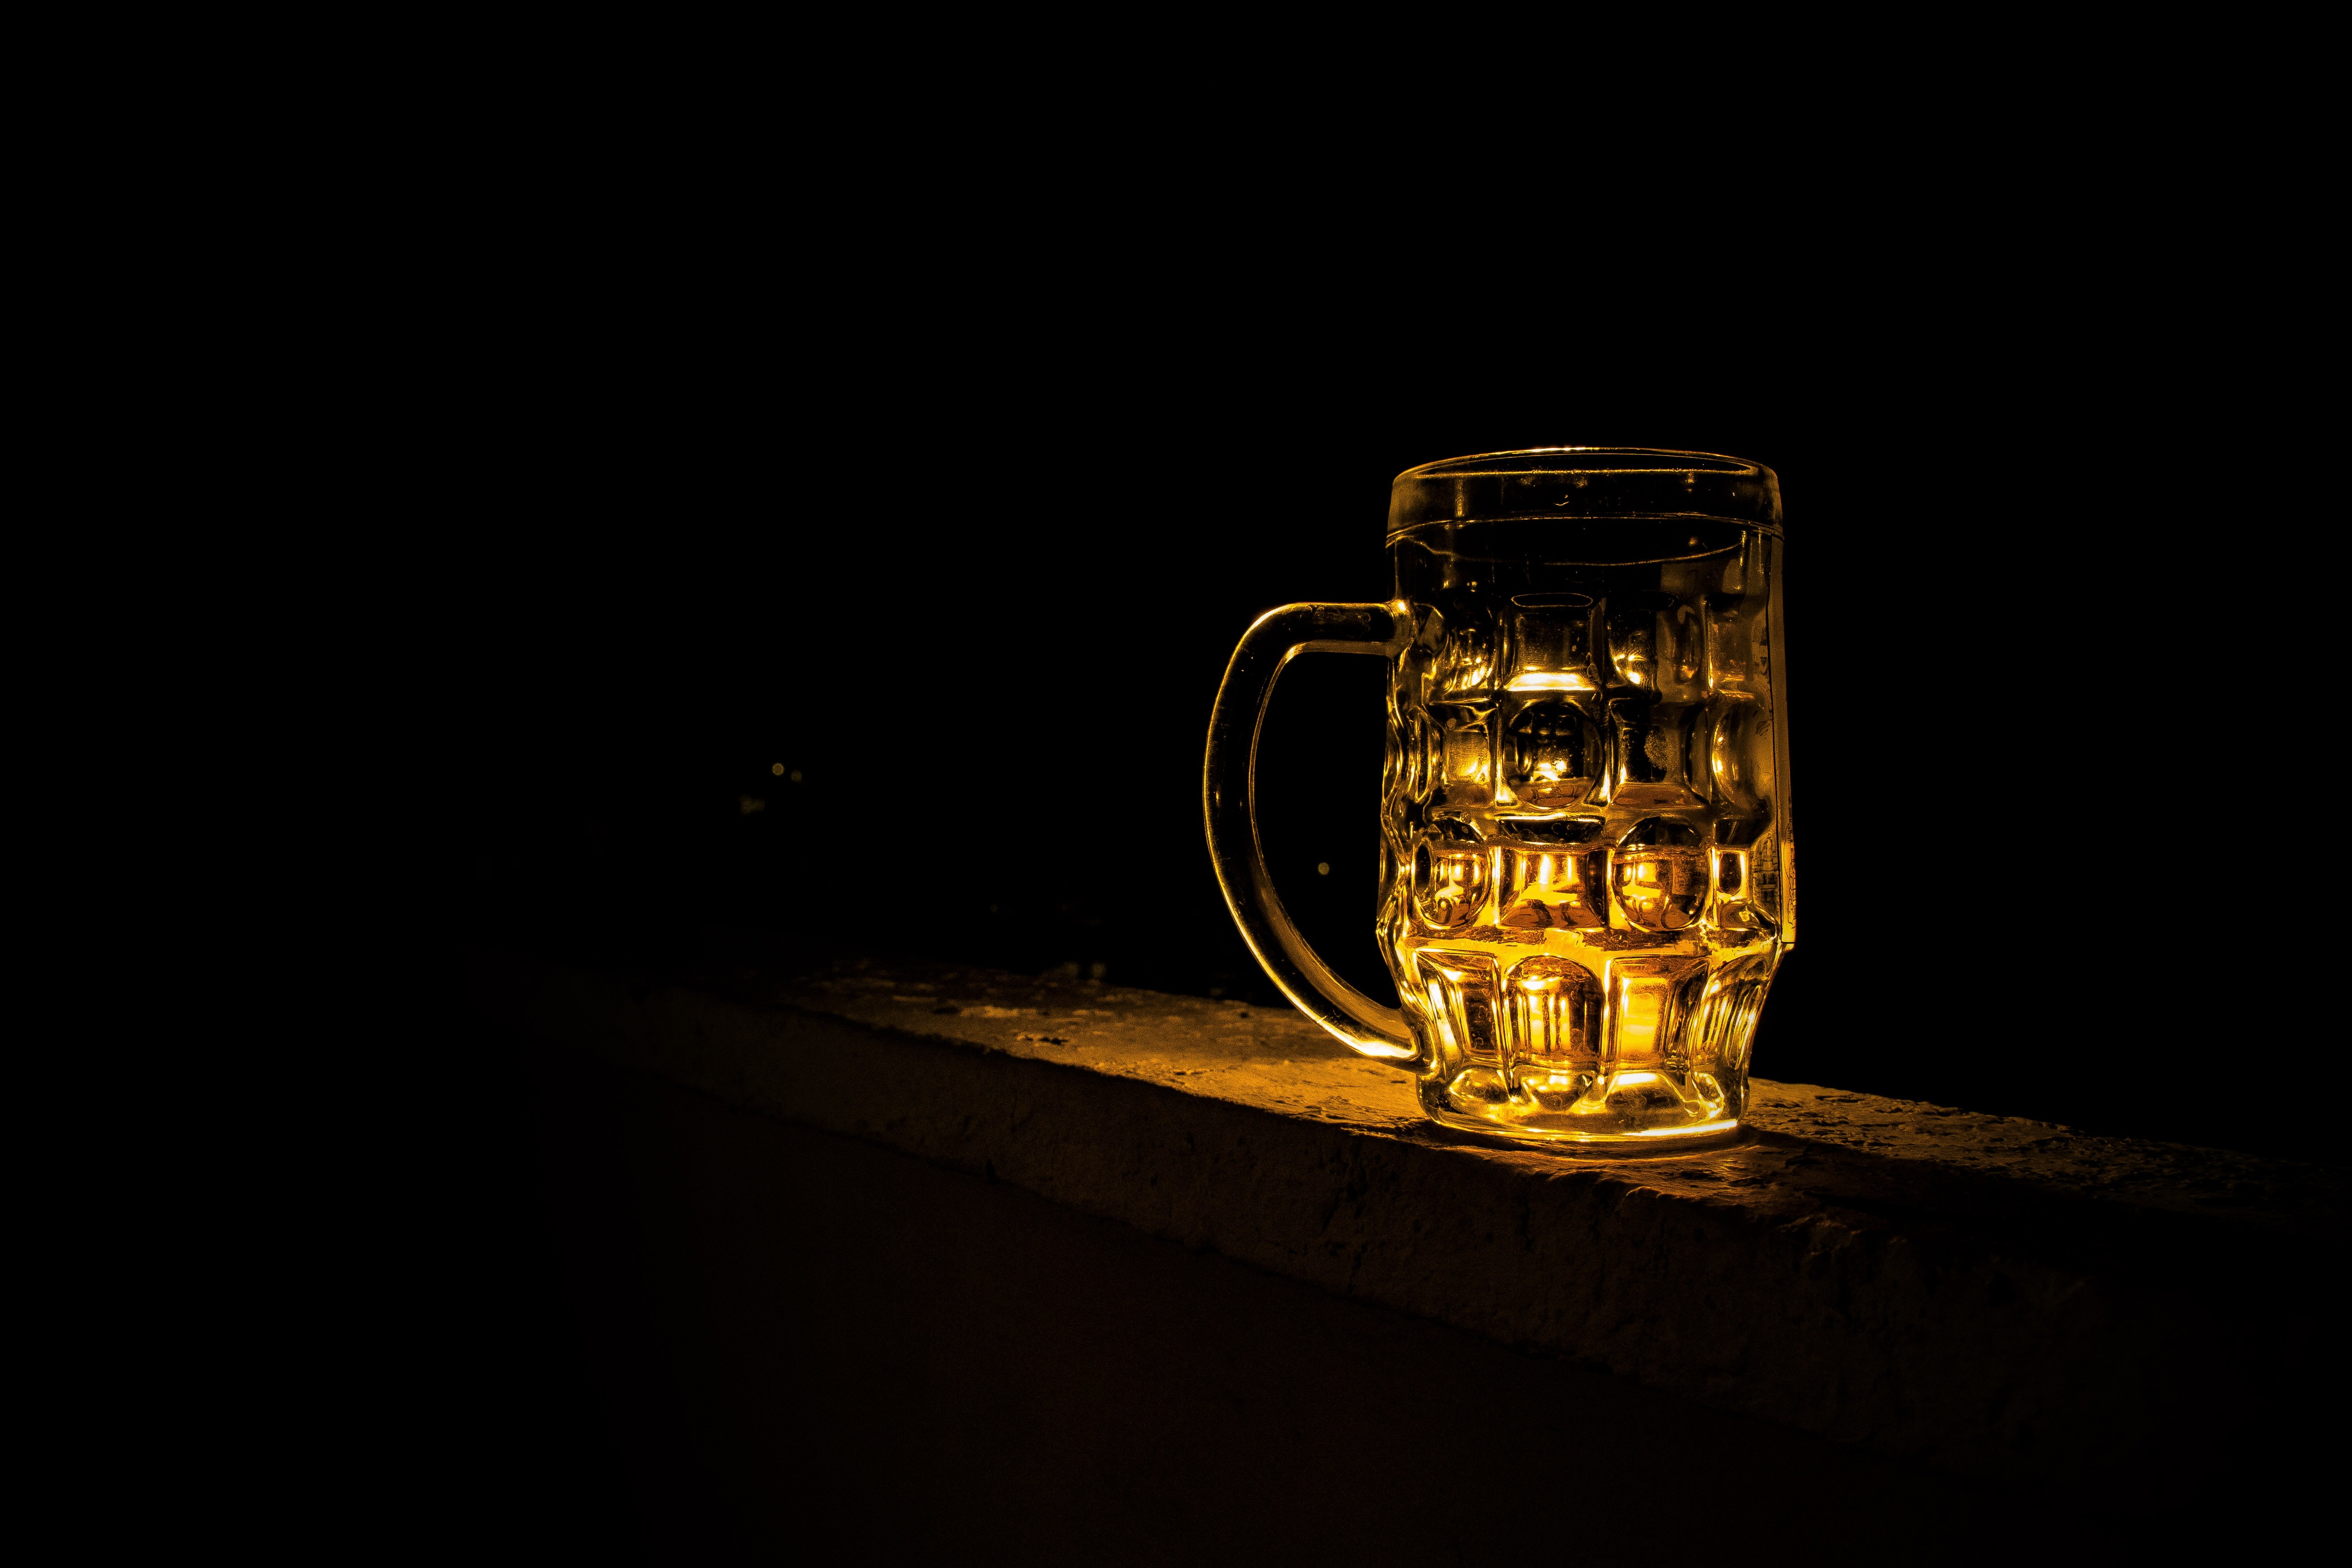 Dimly lit image of a beer mug on a ledge, highlighted by a warm glow, symbolizing alcohol consumption which could be connected to discussions on DUI laws and the severity of such regulations in Arizona.